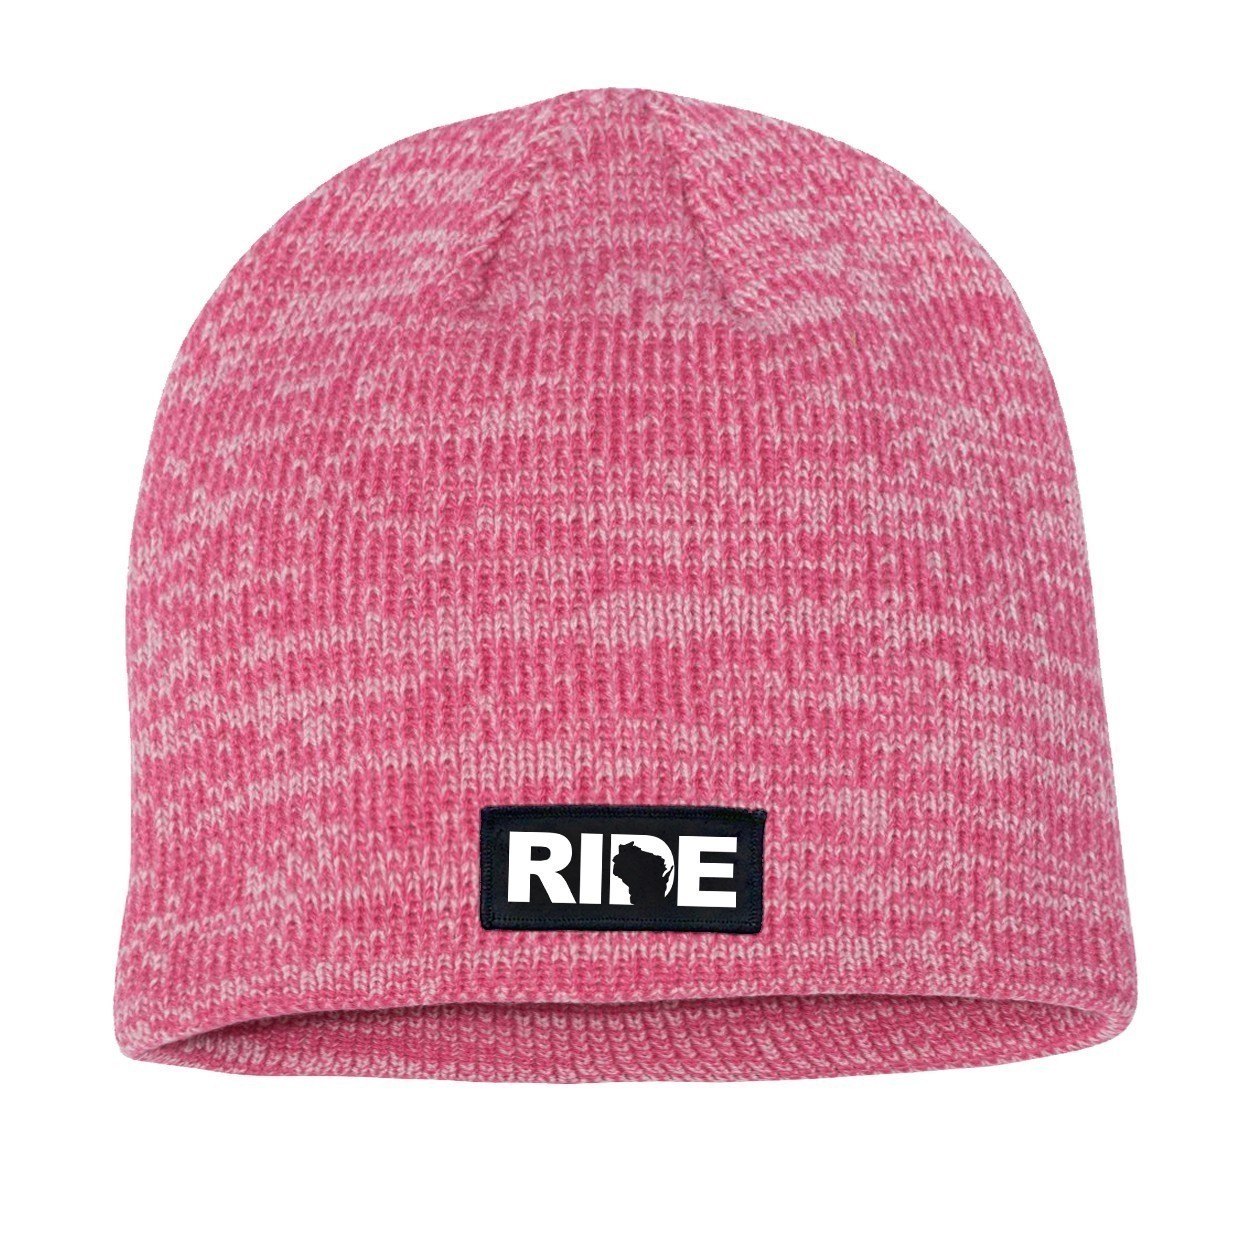 Ride Wisconsin Night Out Woven Patch Skully Marled Knit Beanie Pink/Dark Pink (White Logo)